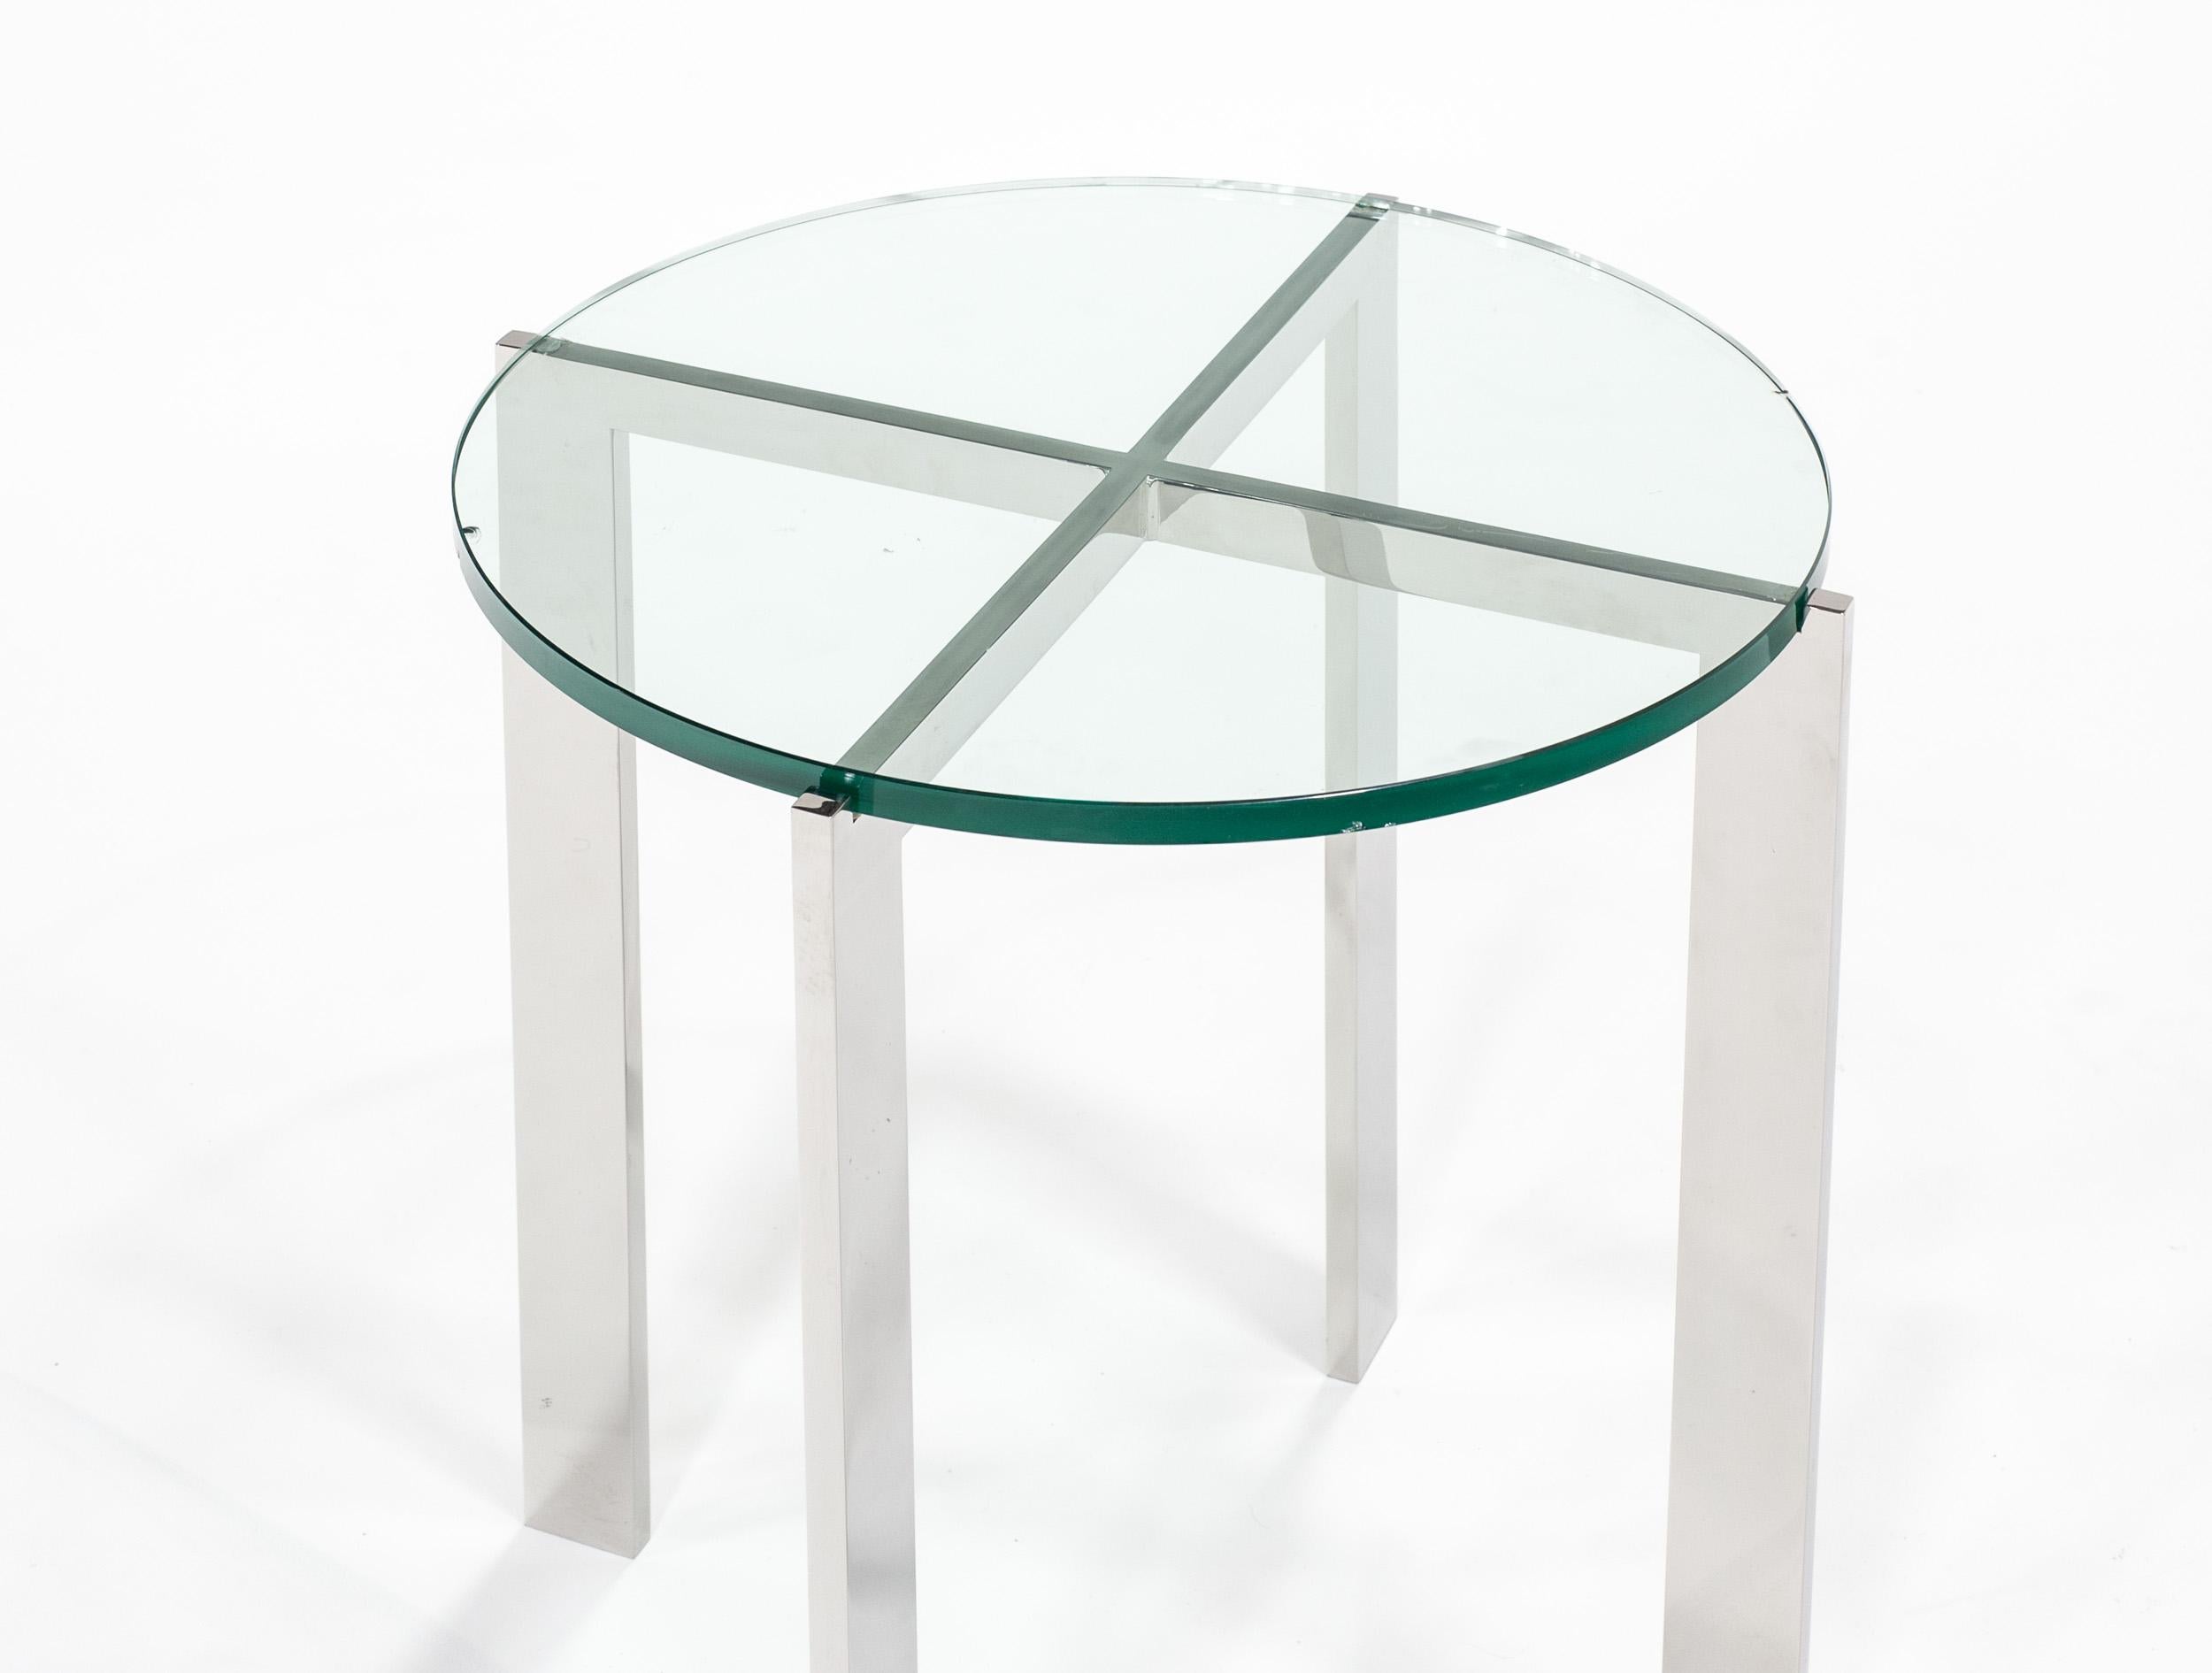 Modern HOLLY HUNT Morgan Side Table in Stainless Steel Base with Glass Top